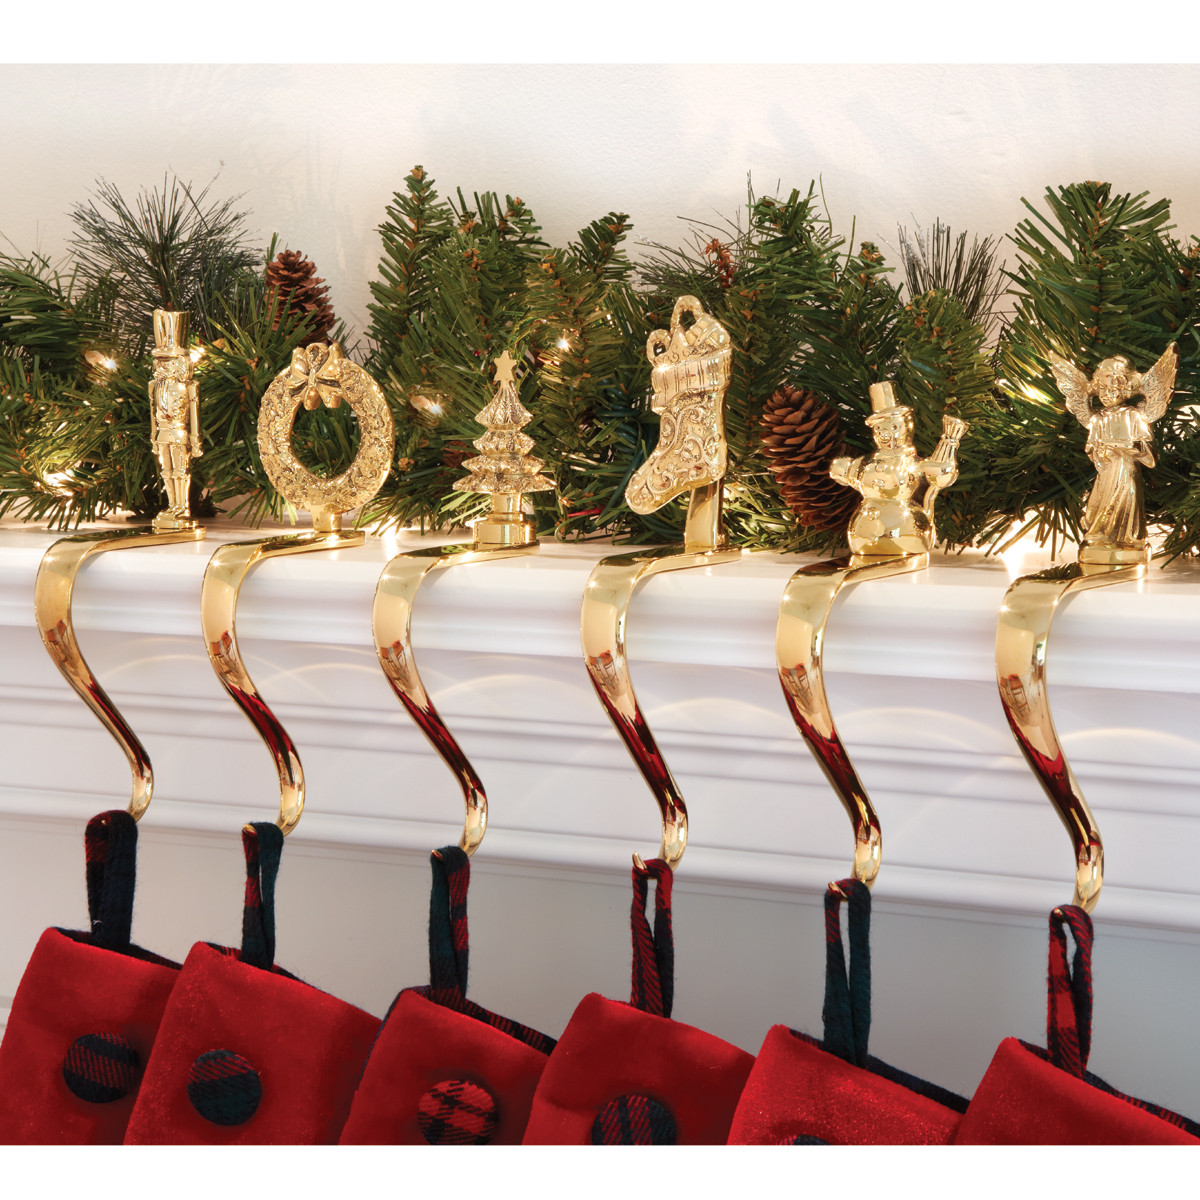 Christmas Stocking Hangers For Fireplace
 Brass Stocking Holders with Design from Sporty s Tool Shop